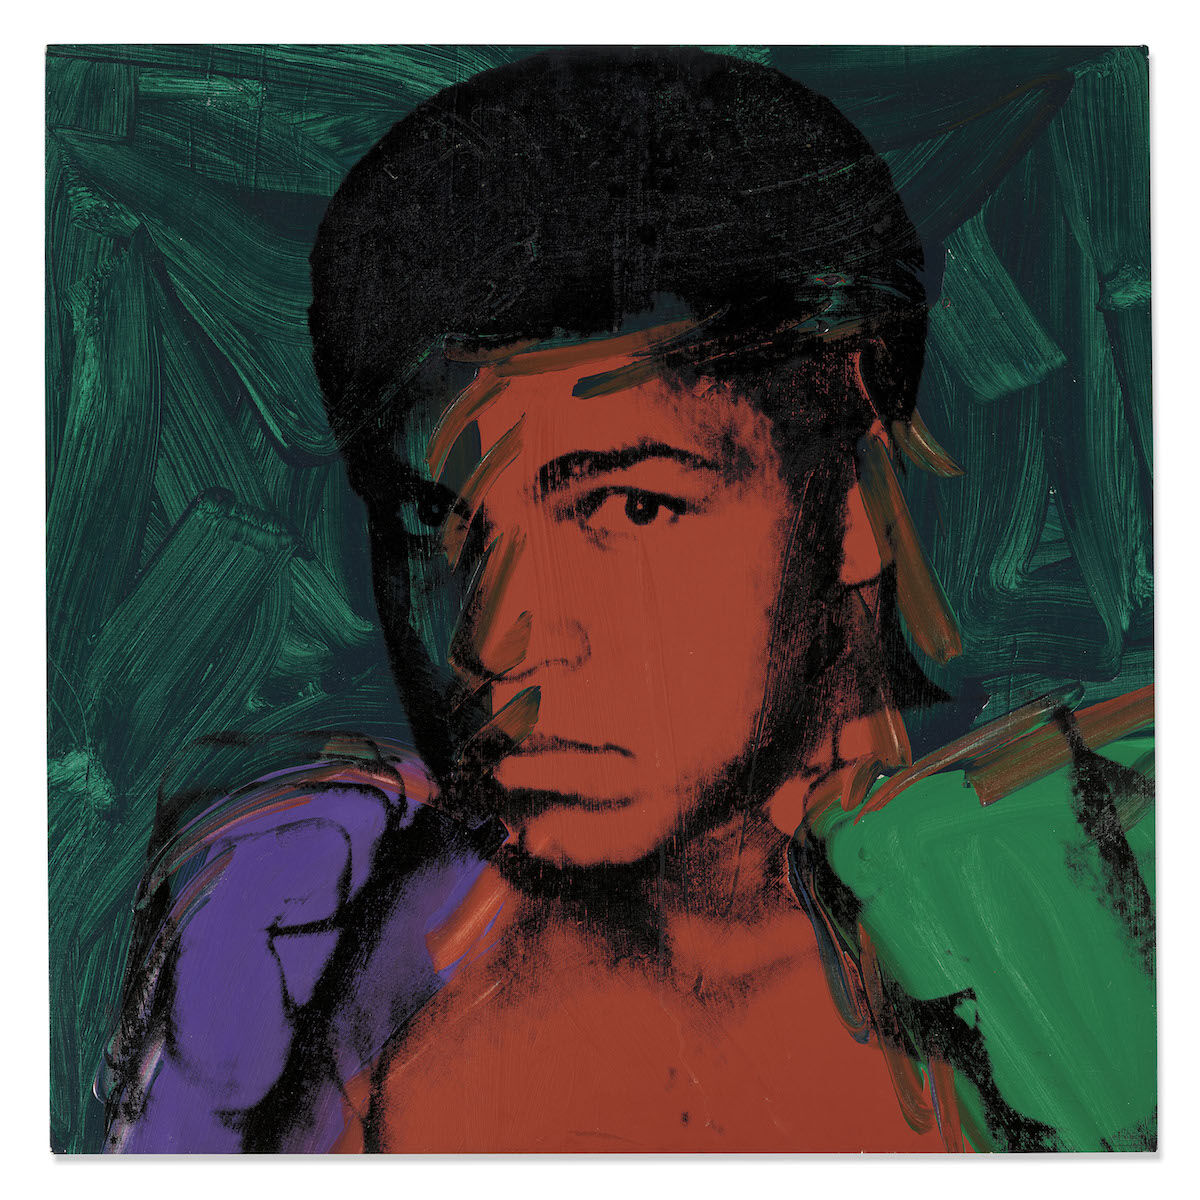 Andy Warhol, Muhammad Ali, 1977. Sold for £4.9 million ($6.3 million). © Christie’s Images Limited 2020.